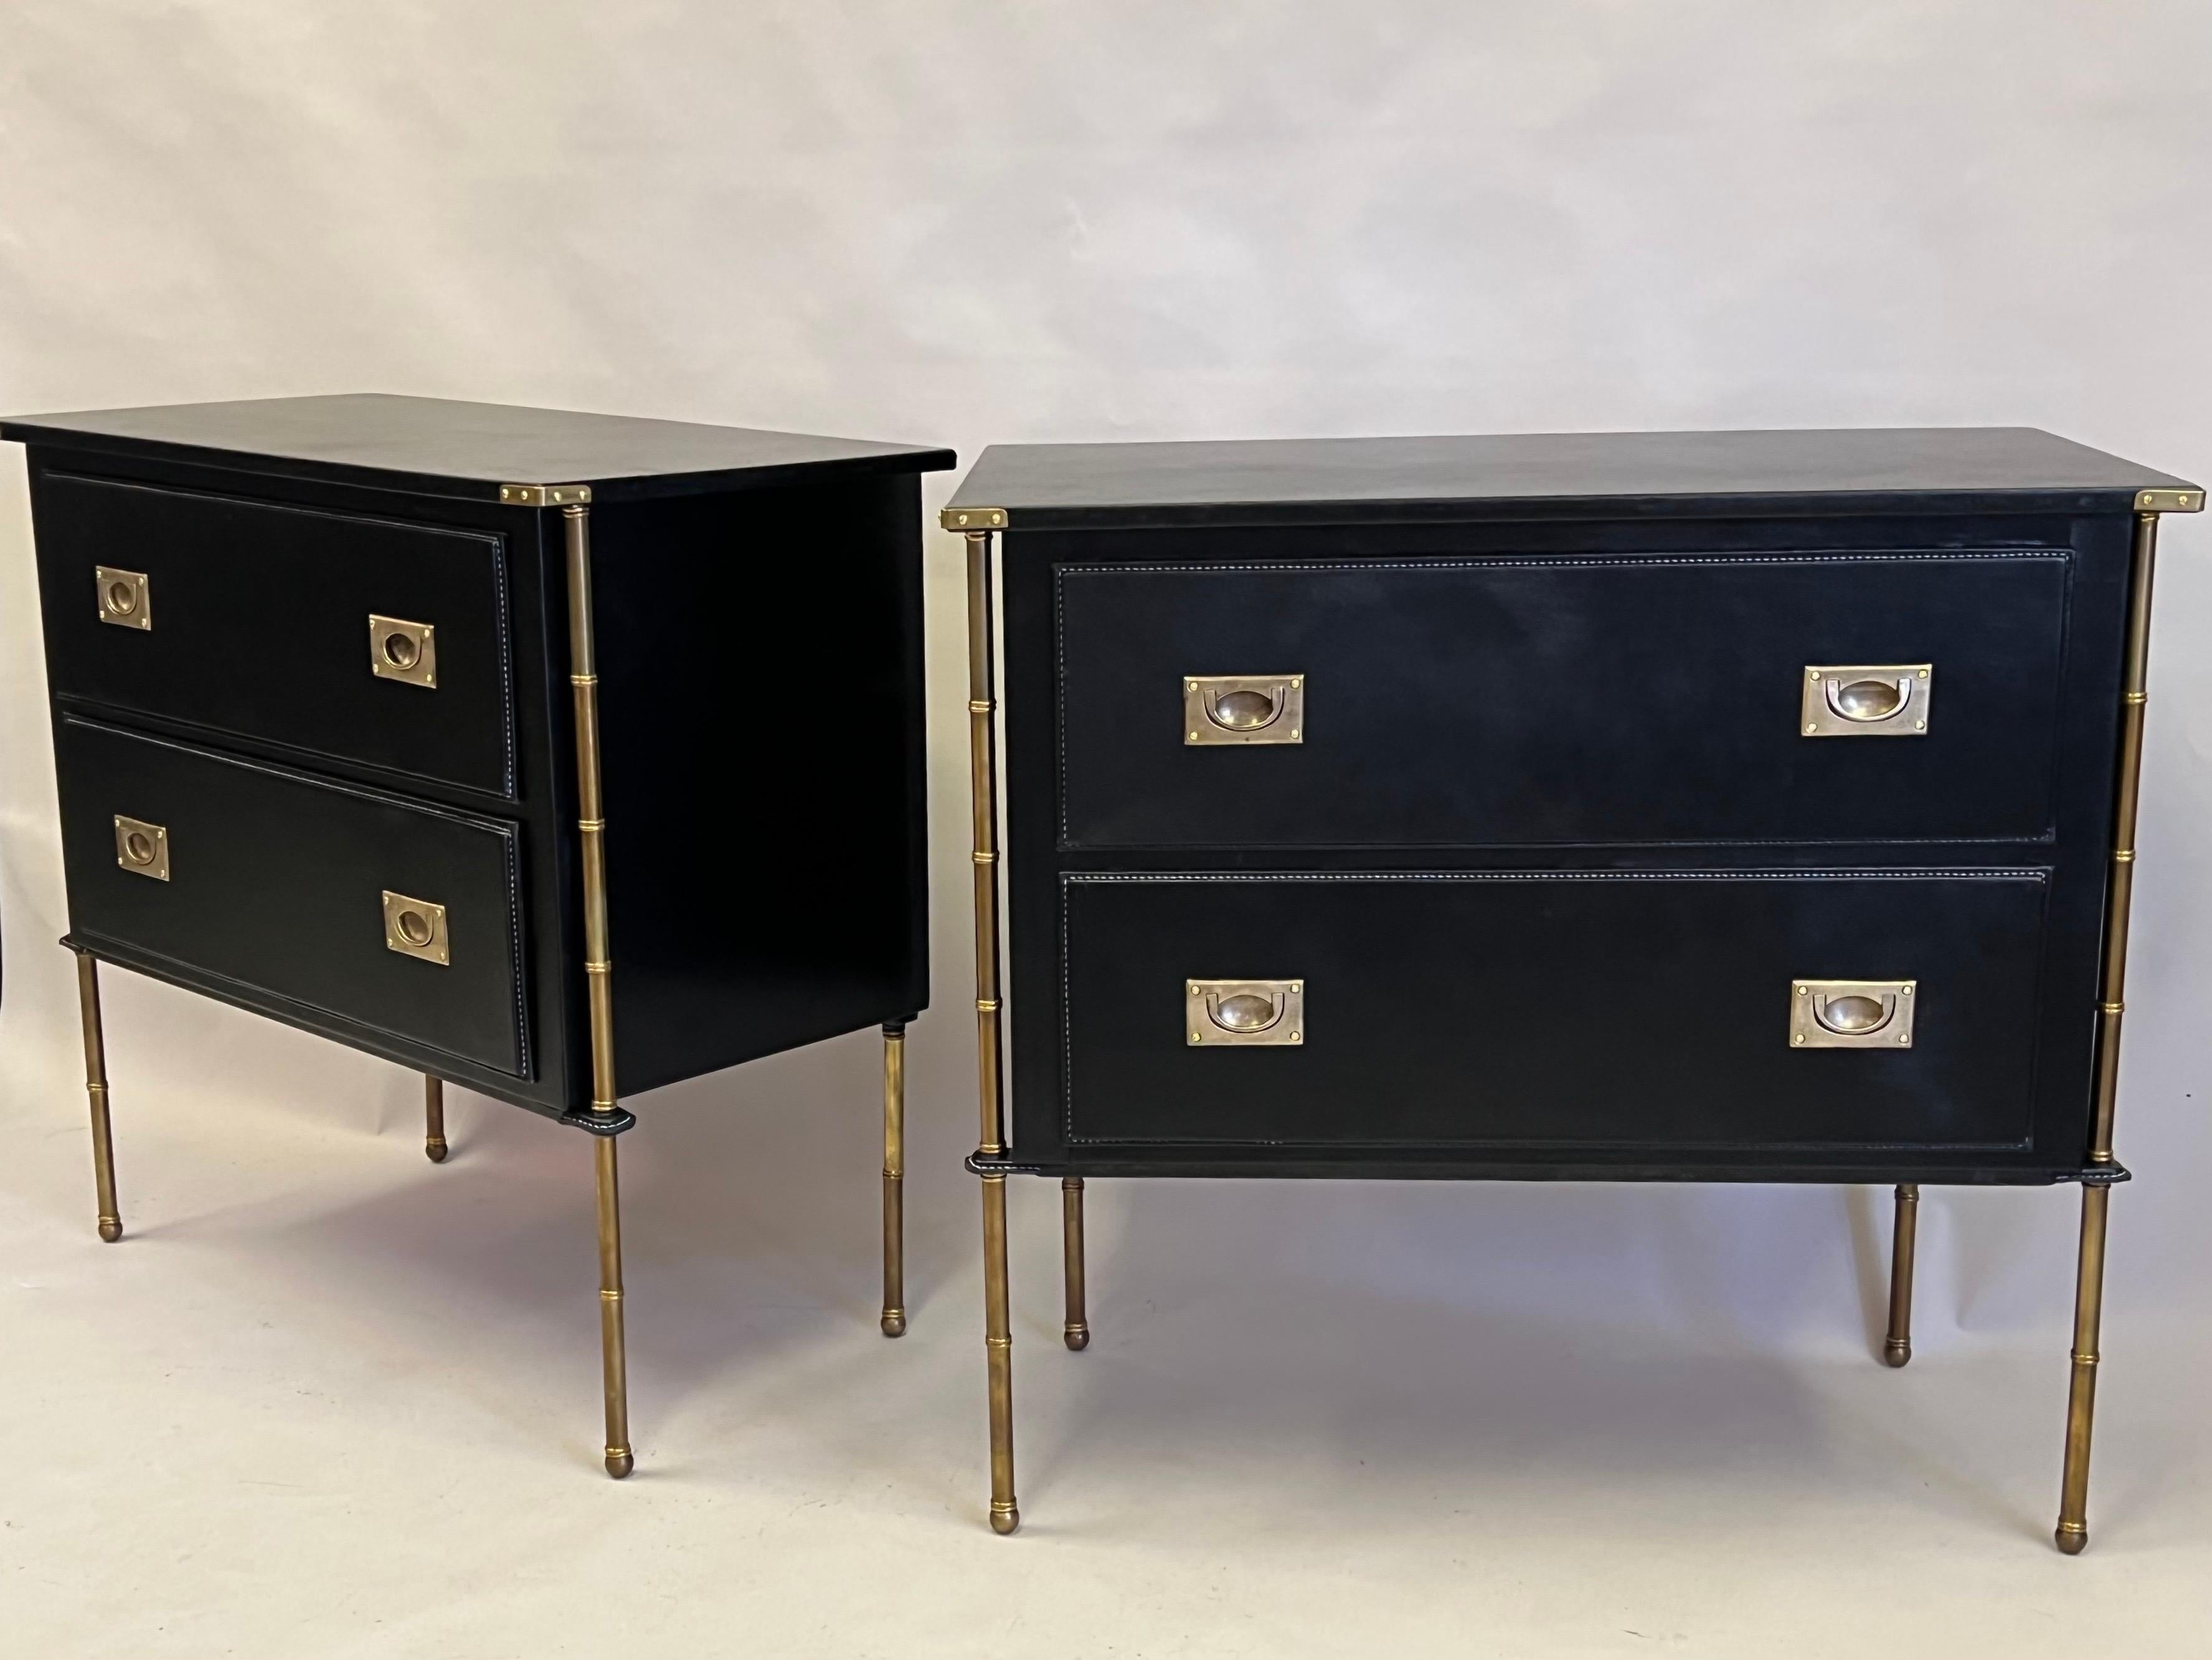 A Rare and Important Pair of French Midcentury Modern Neoclassical hand stitched leather and brass faux bamboo cabinets, dressers, commodes or chest of drawers by Jacques Adnet, circa 1955.

It is rare to find a pair of faux bamboo and hand stitched